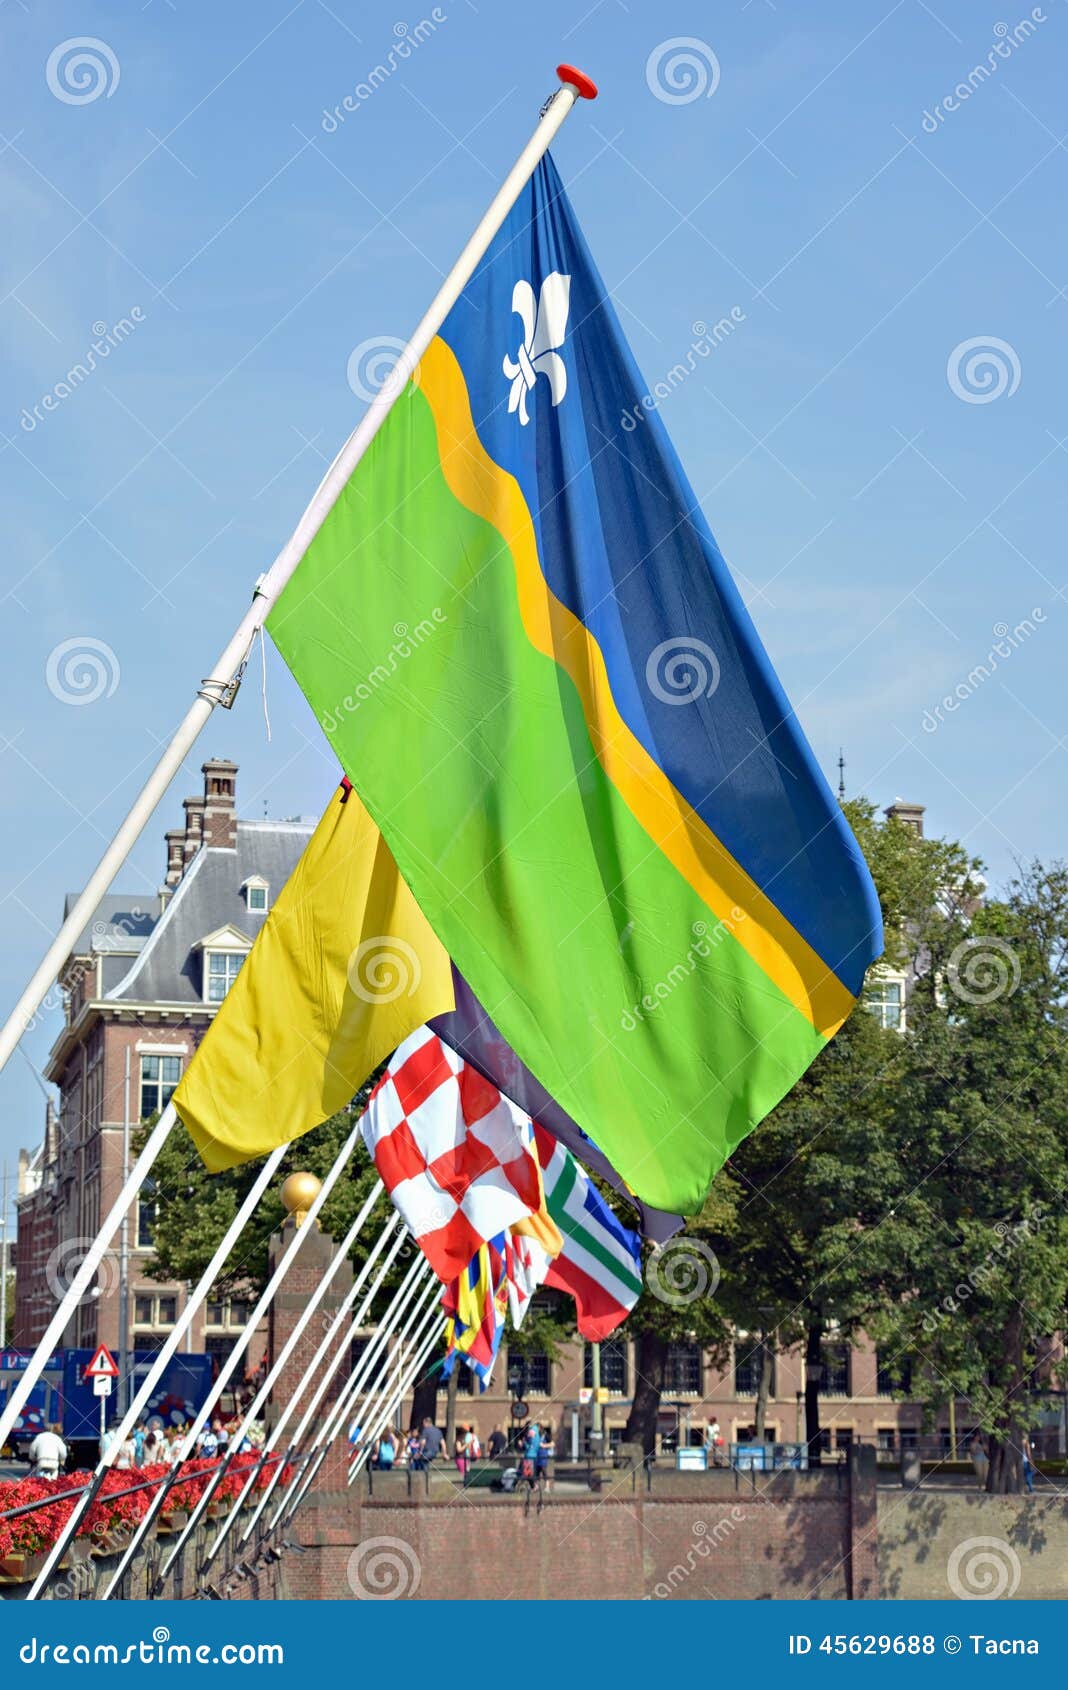 Center of Hague, Netherlands Editorial Stock Photo - Image of countries ...